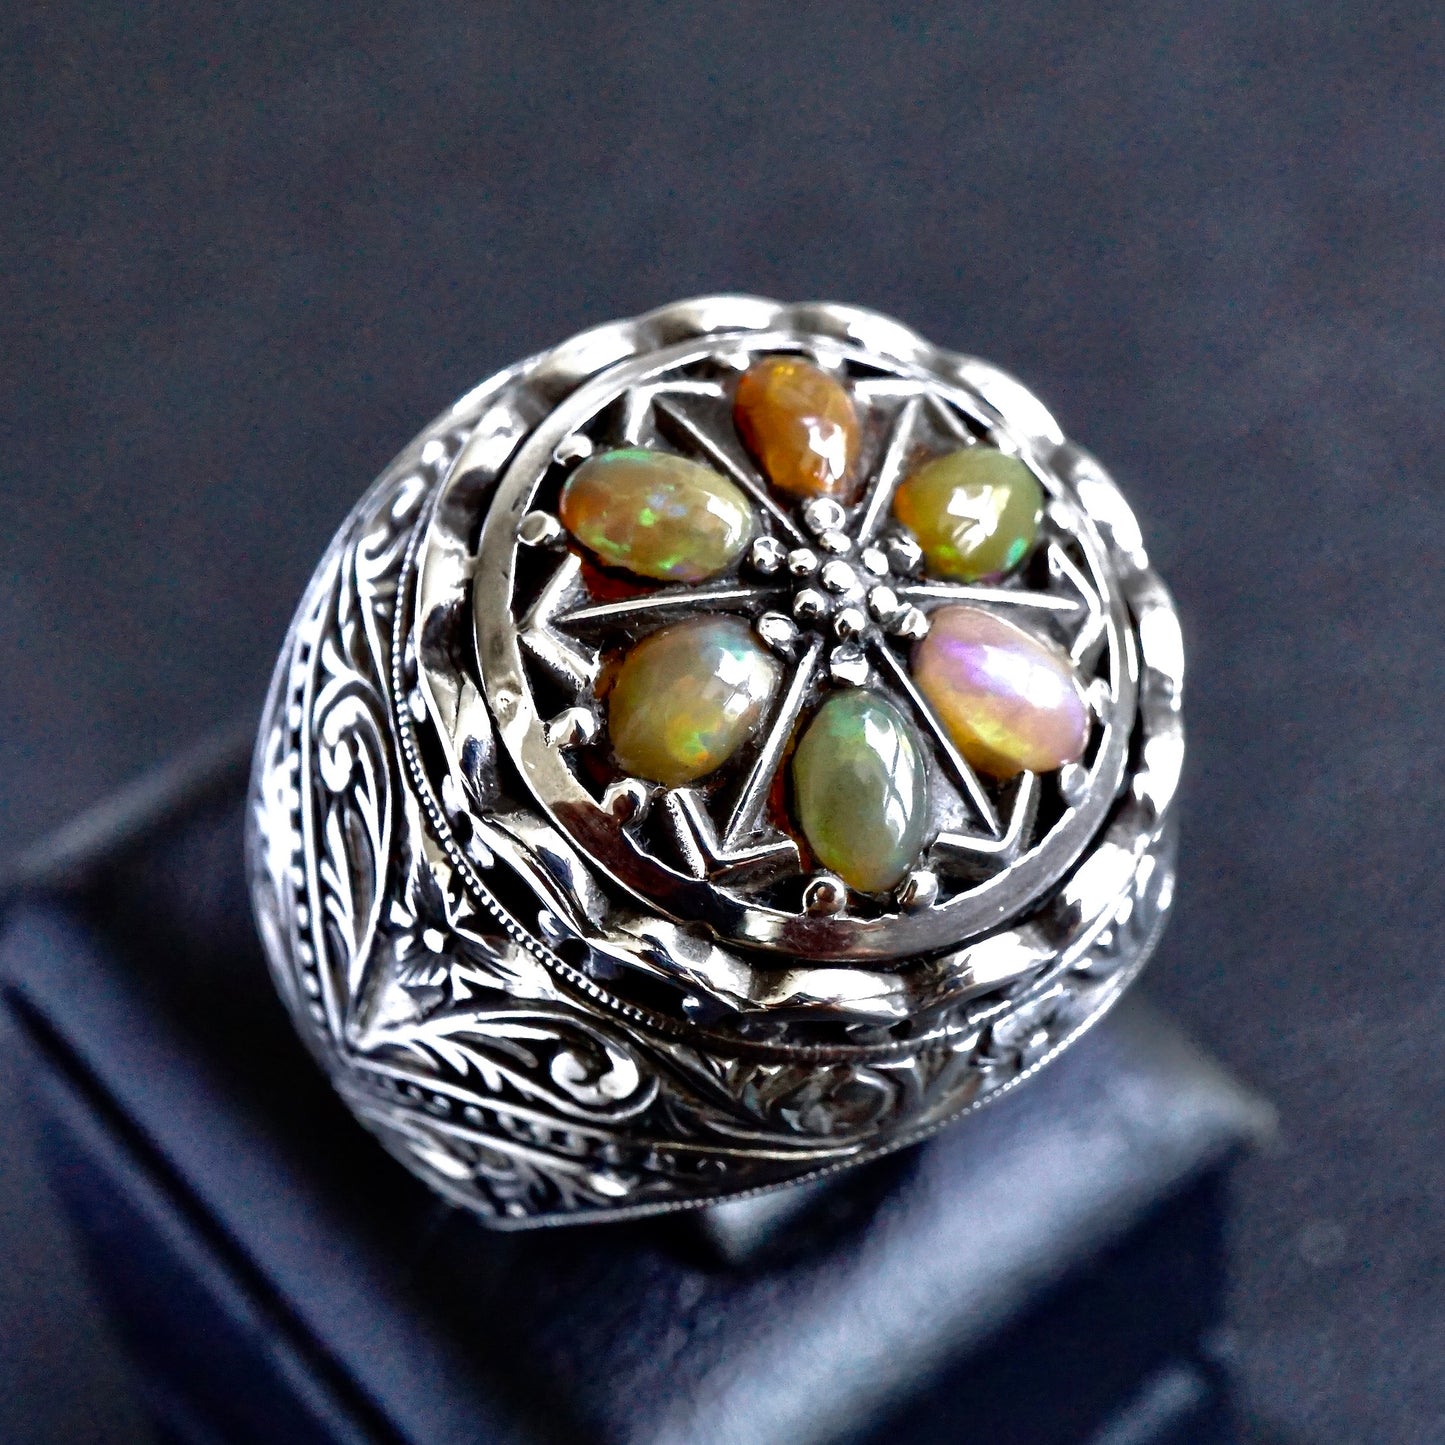 Opal Ring Unique Handmade Artisan Jewelry Solid Sterling Silver